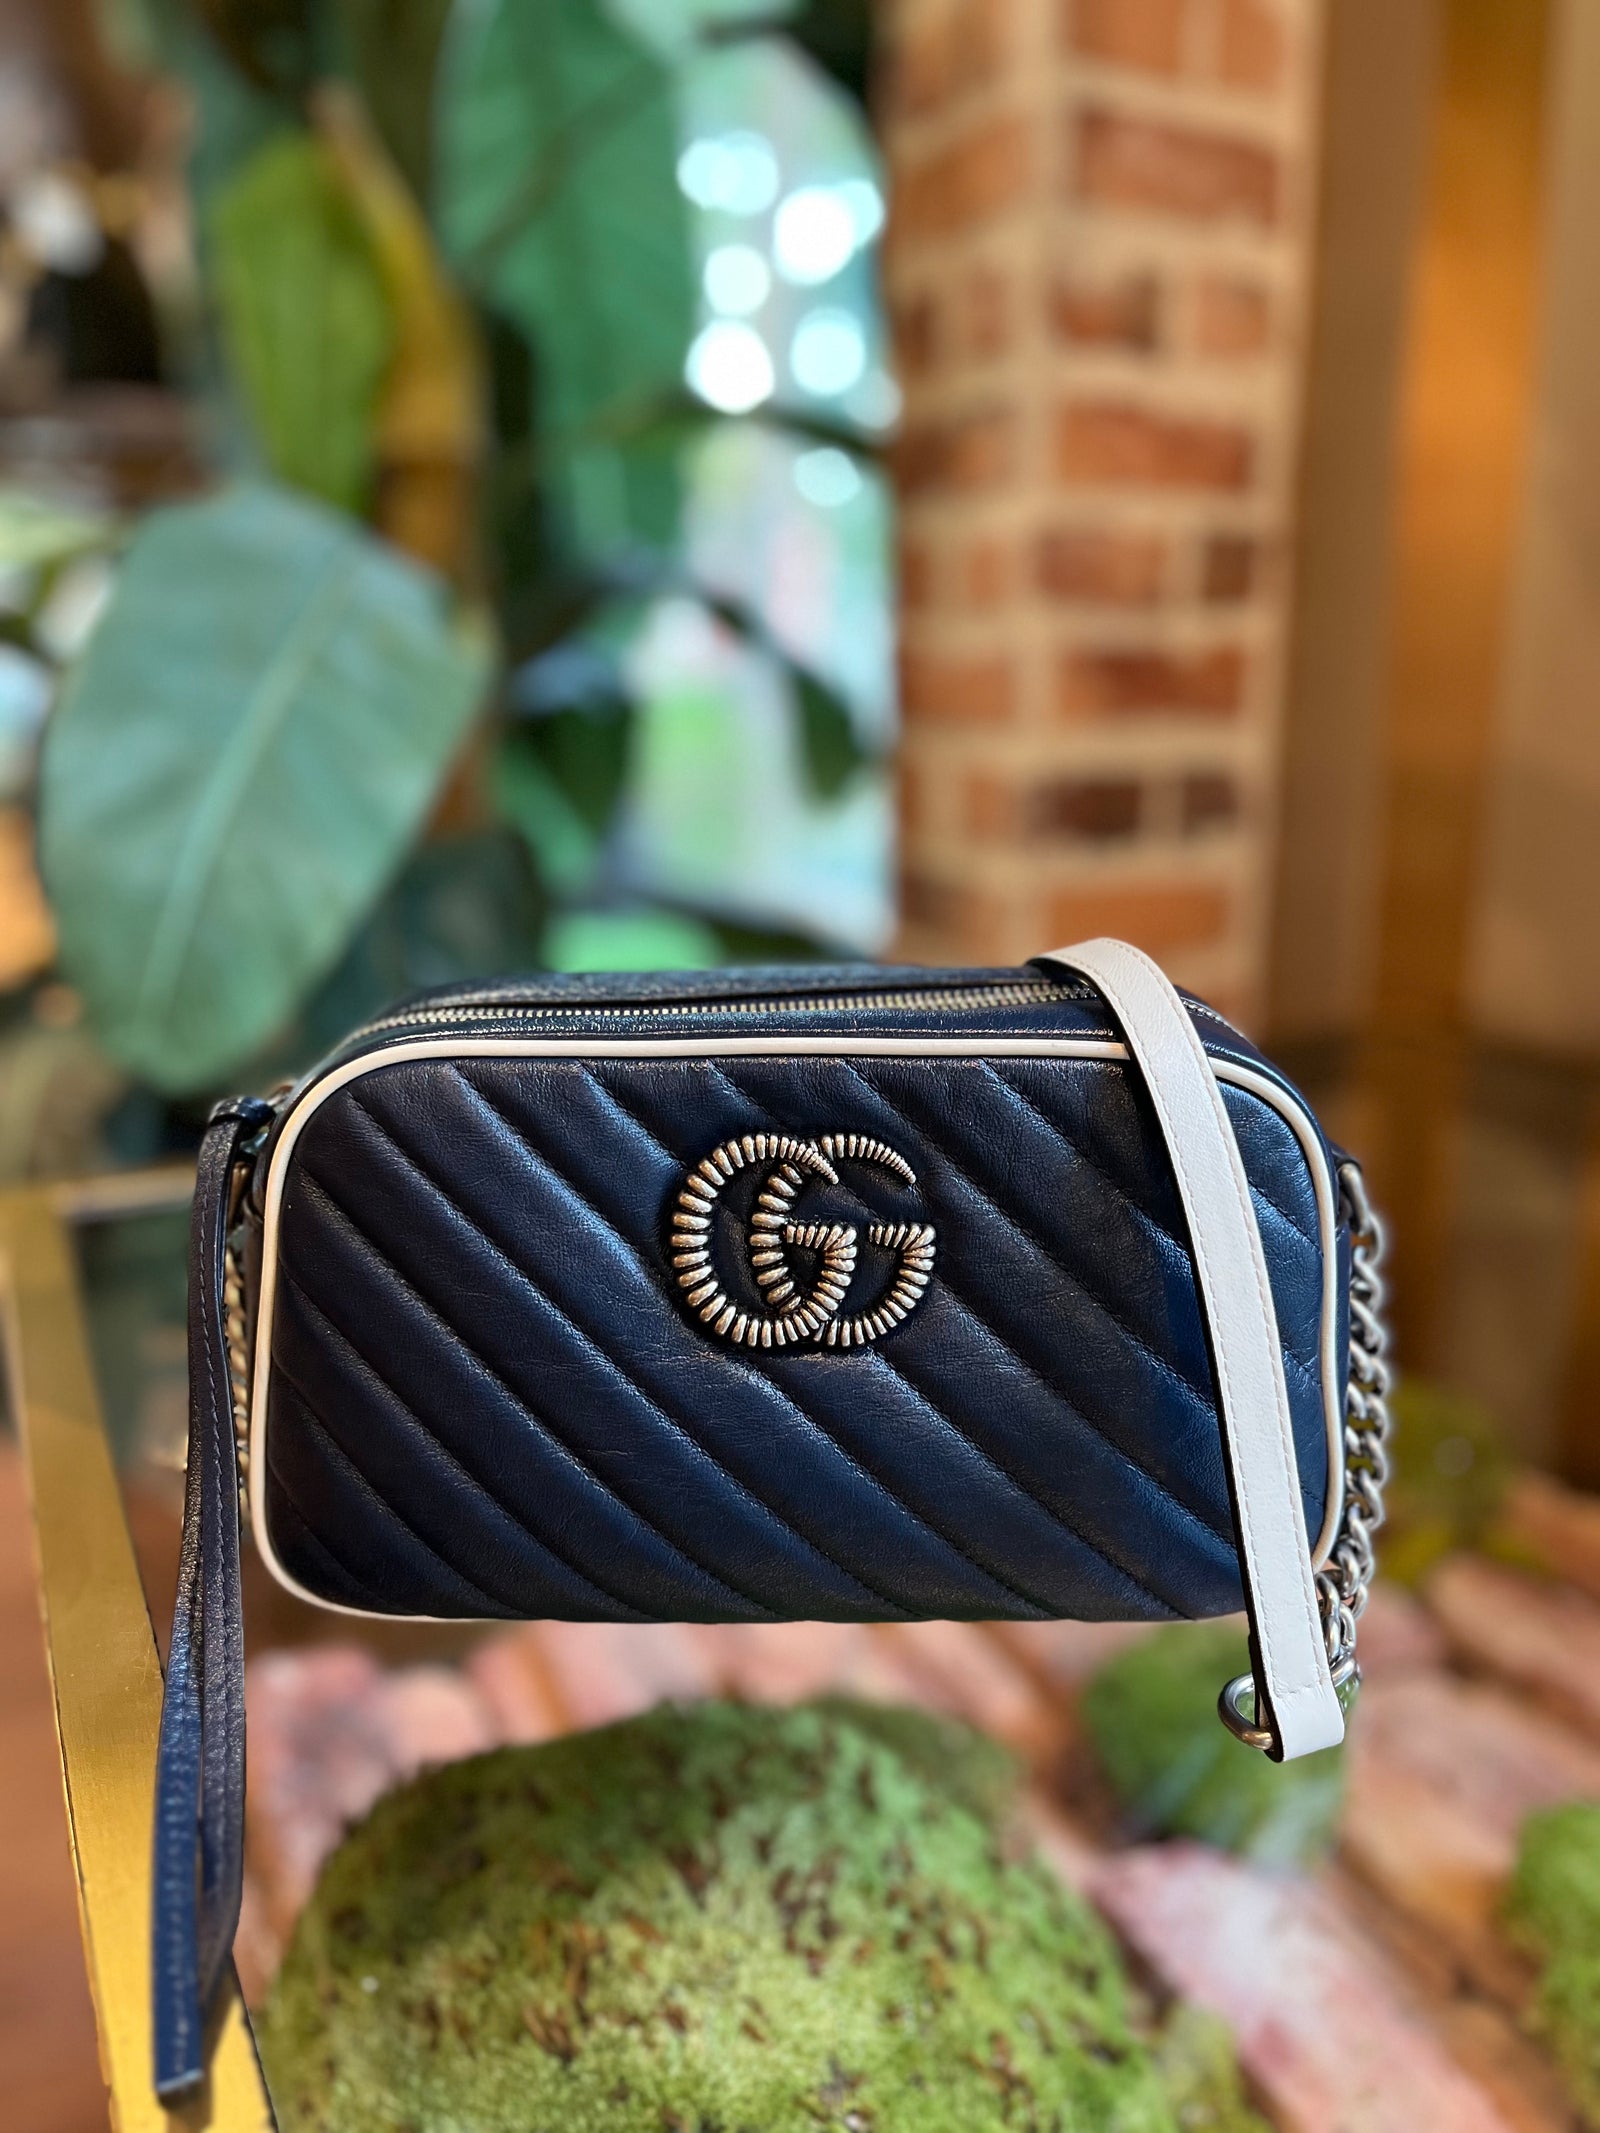 How To Authenticate Gucci Bags & Shoes